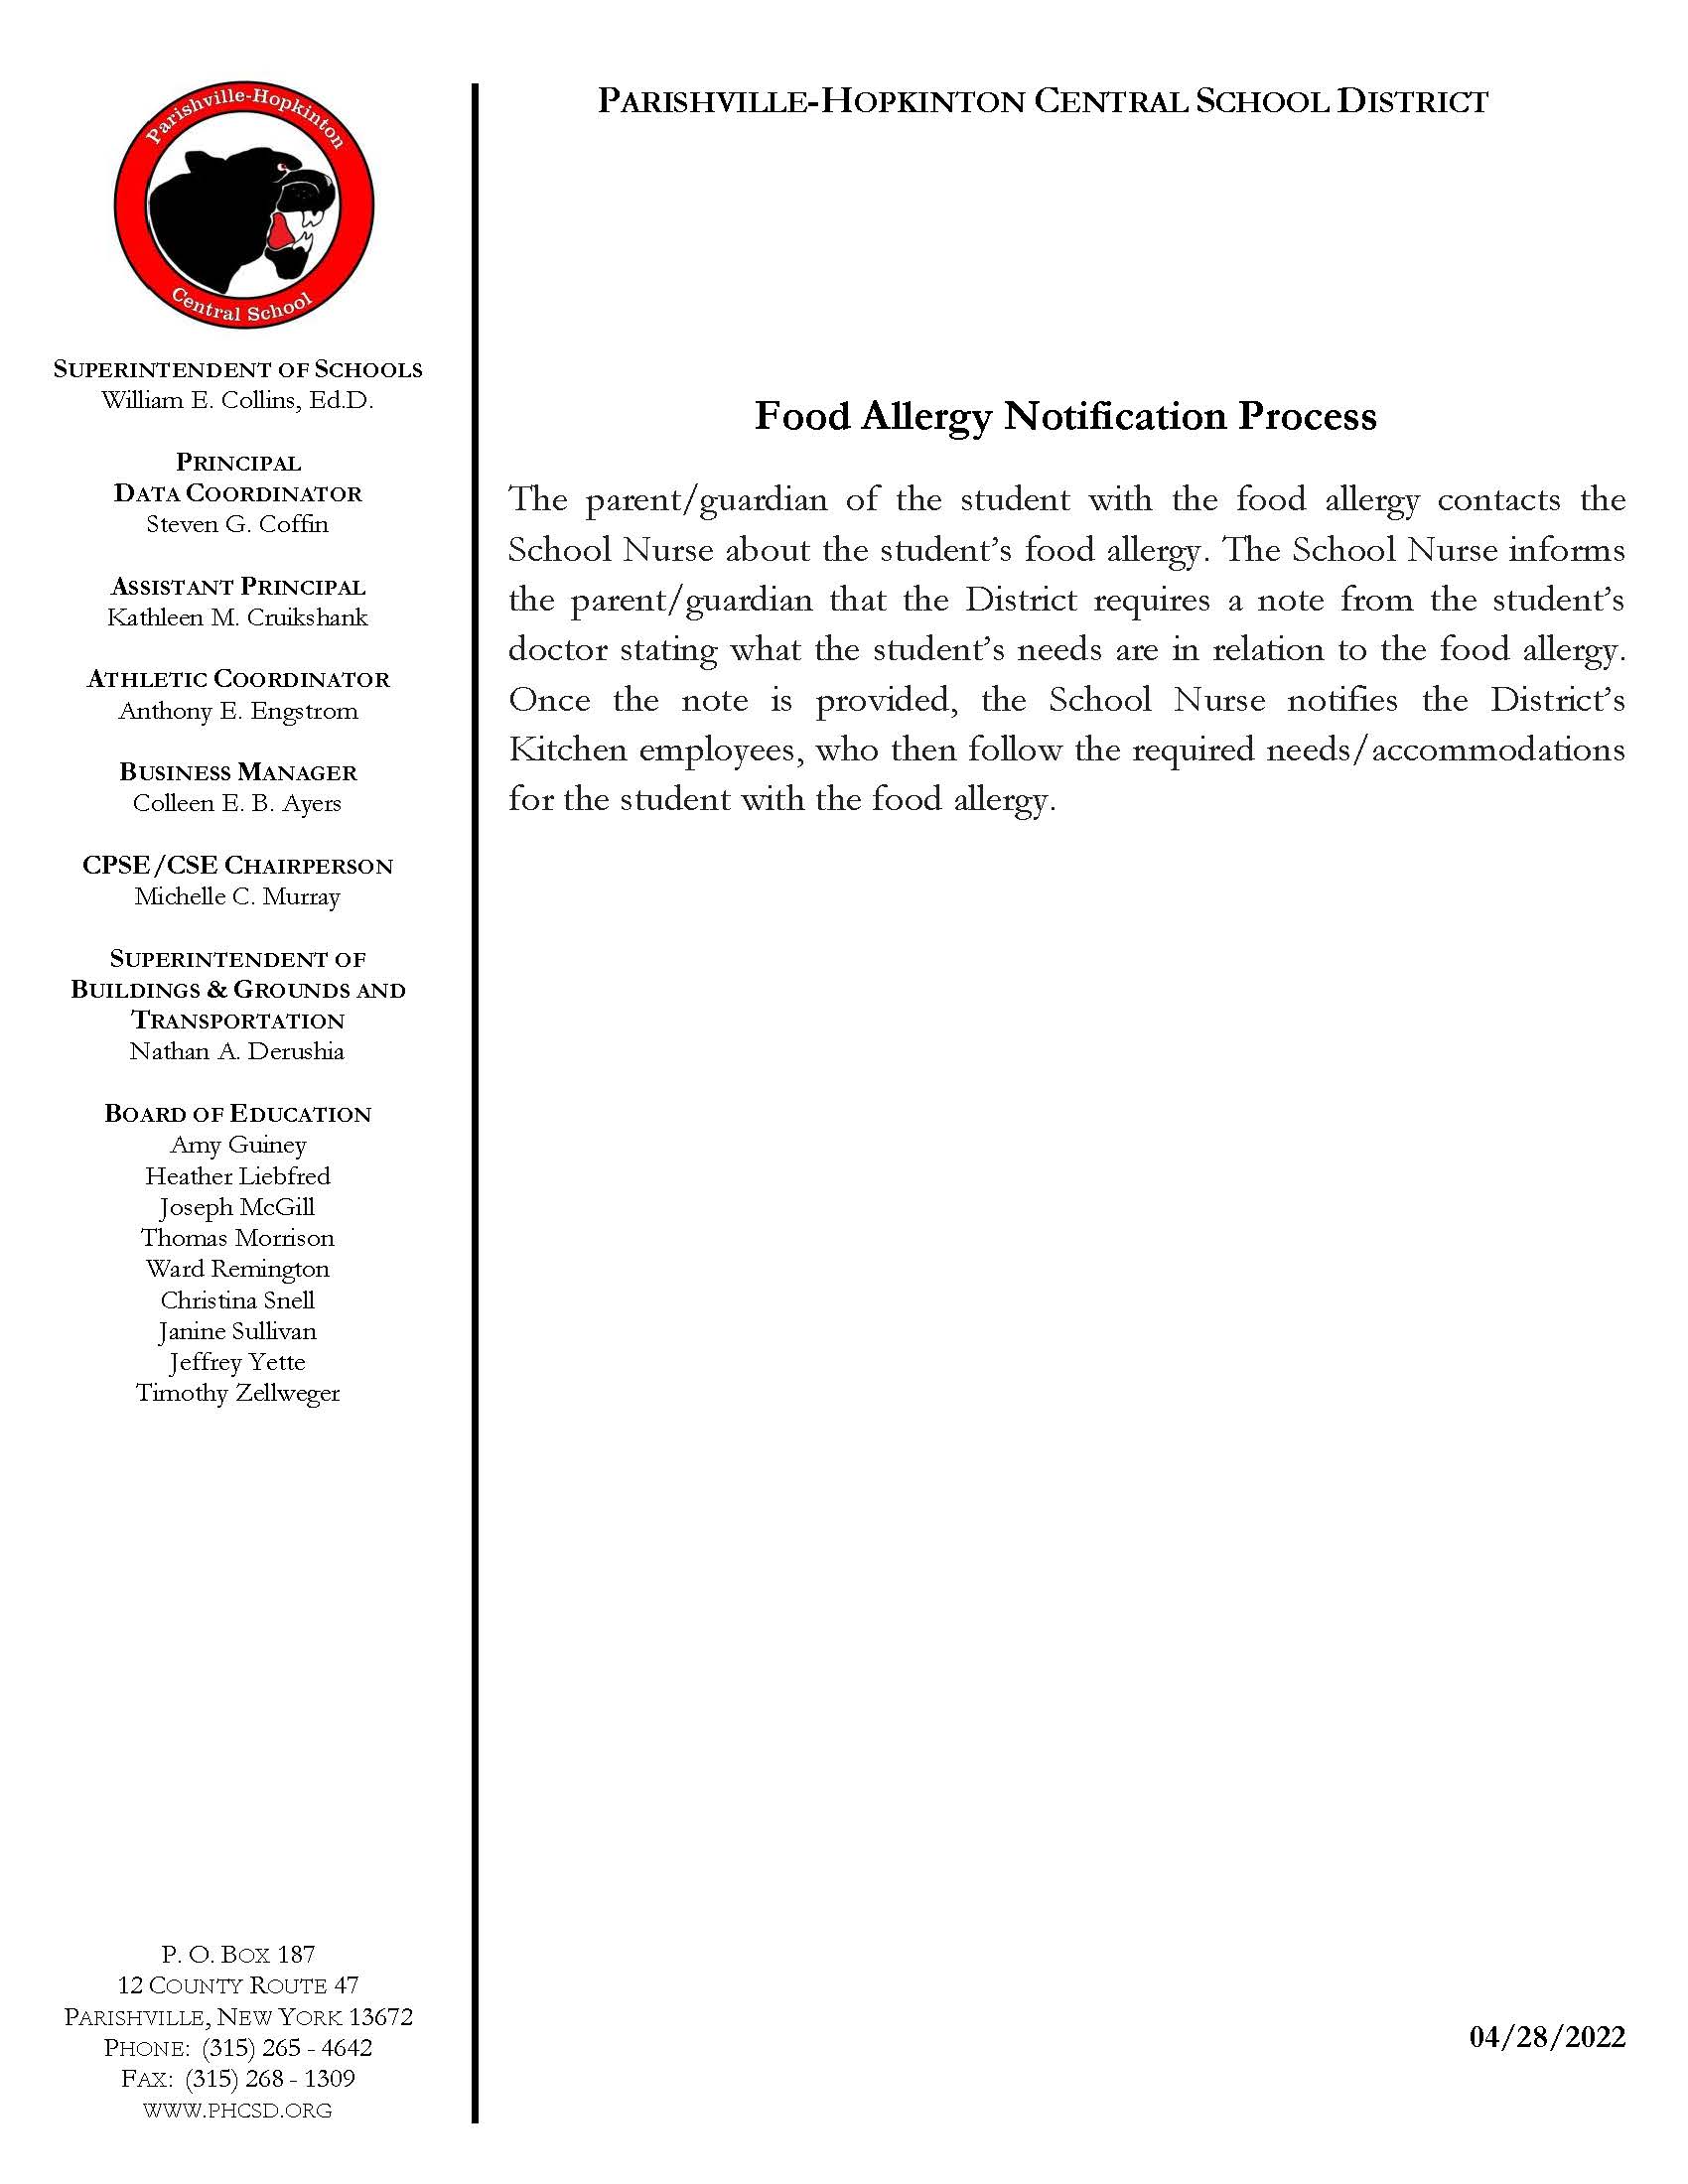 Food Allergy Notification Process